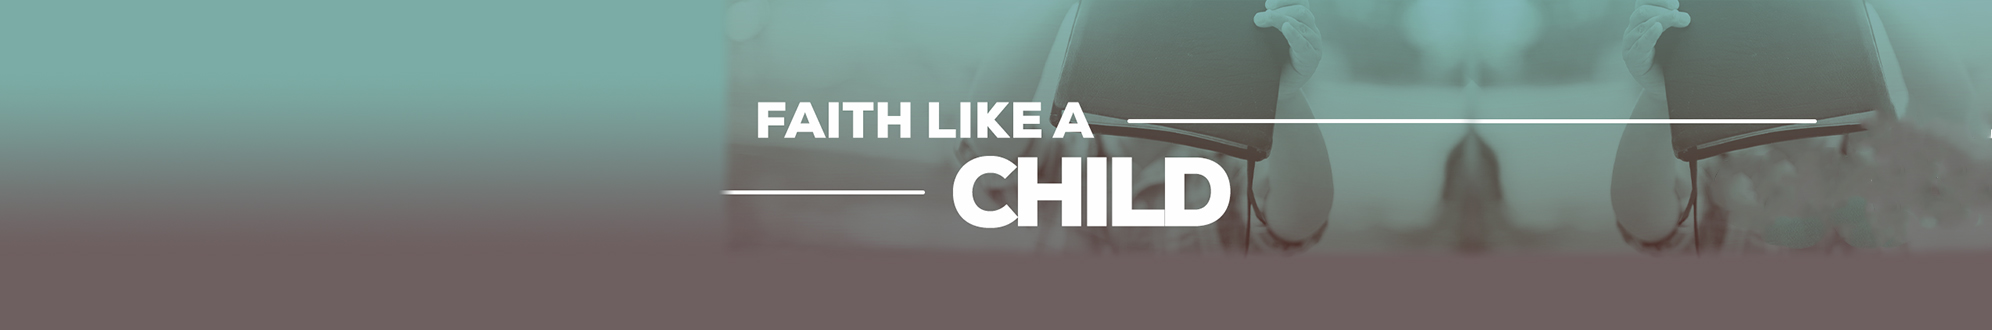 What Does Childlike, Not Childish, Faith Look Like?